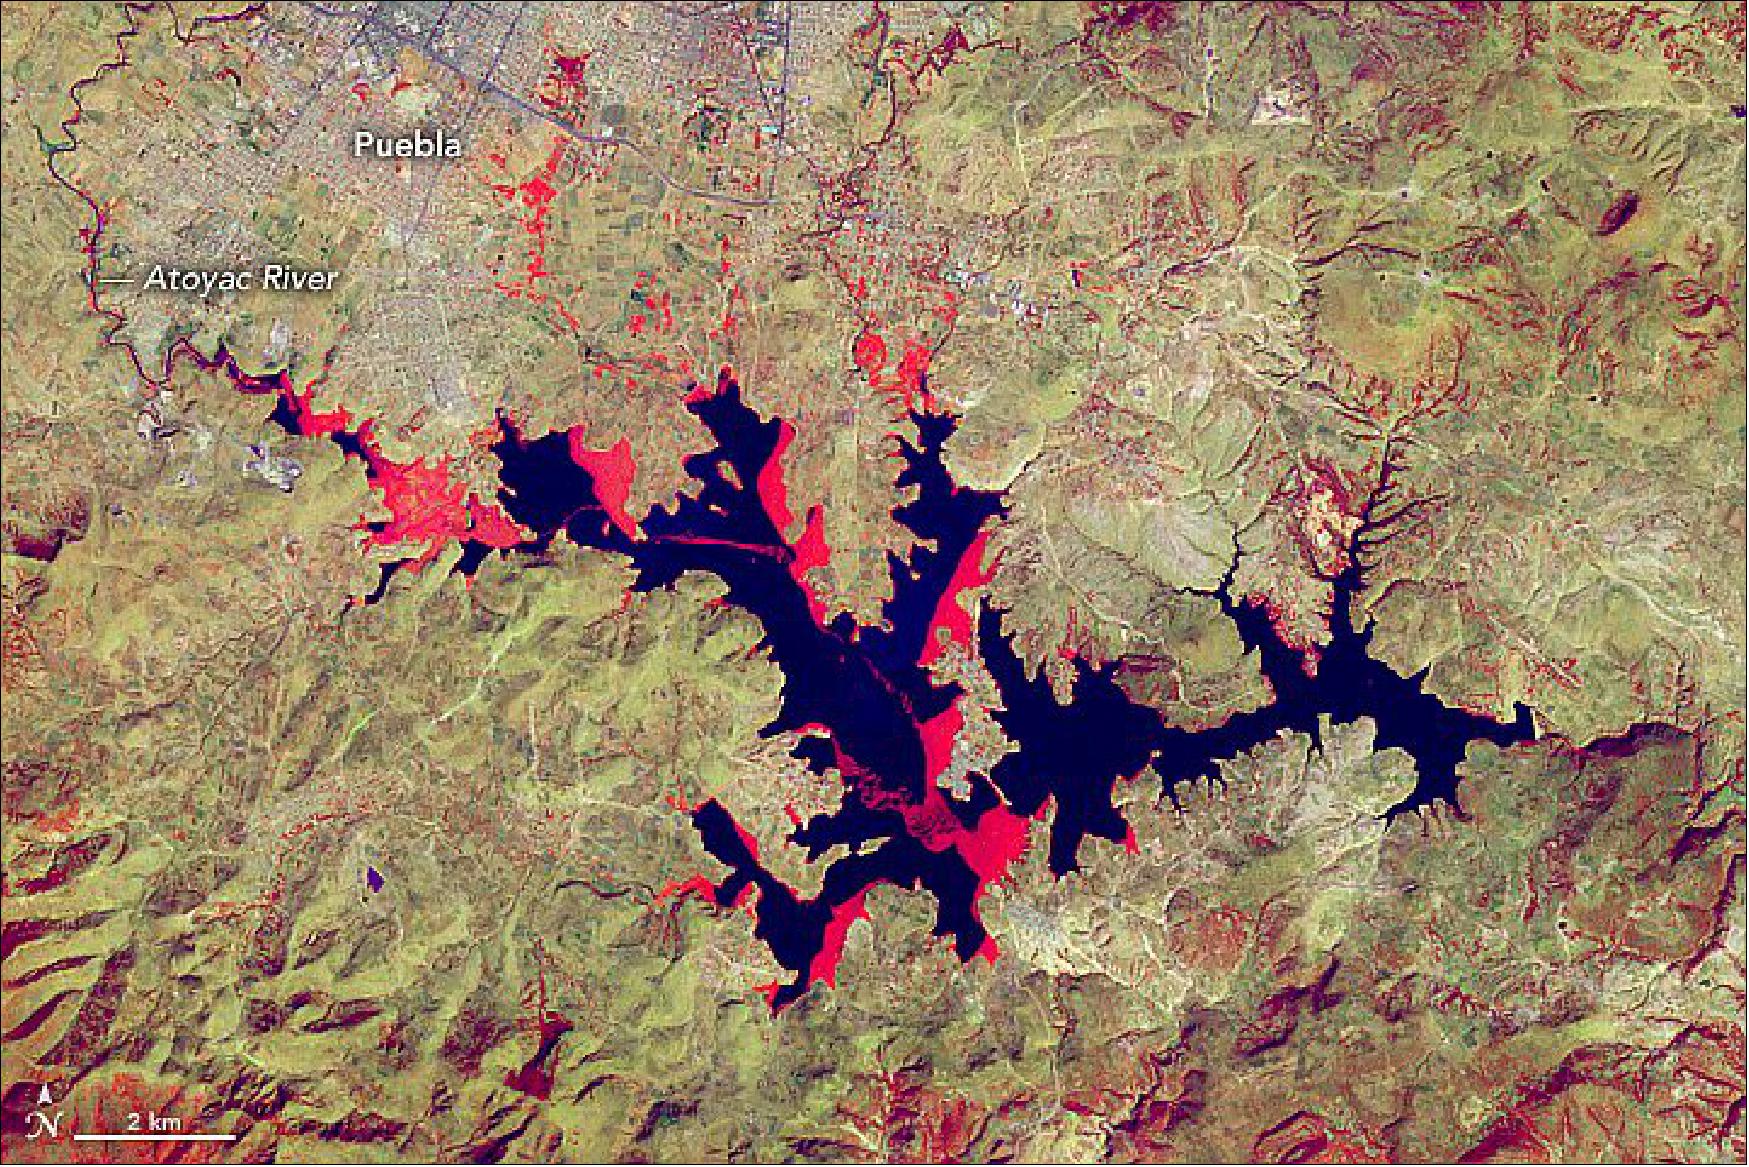 Figure 41: The false-color images show the spread of water hyacinths across Mexico’s Valsequillo reservoir from January 10, 2000 (Figures 41), to January 9, 2020 (Figure 42). The images combine infrared, red, and green wavelengths to help differentiate between water and land. Clear water is blue and vegetation is red (the brighter the red, the more robust the vegetation). The images were acquired by the Enhanced Thematic Mapper Plus on Landsat-7 (bands 4-7-1) and the Operational Land Imager (OLI) on Landsat-8 (bands 5-7-1), respectively (image credit: NASA Earth Observatory, images by Lauren Dauphin, using Landsat data from the U.S. Geological Survey and using data from Kleinschroth, Fritz, et al. (2020). Story by Kasha Patel)